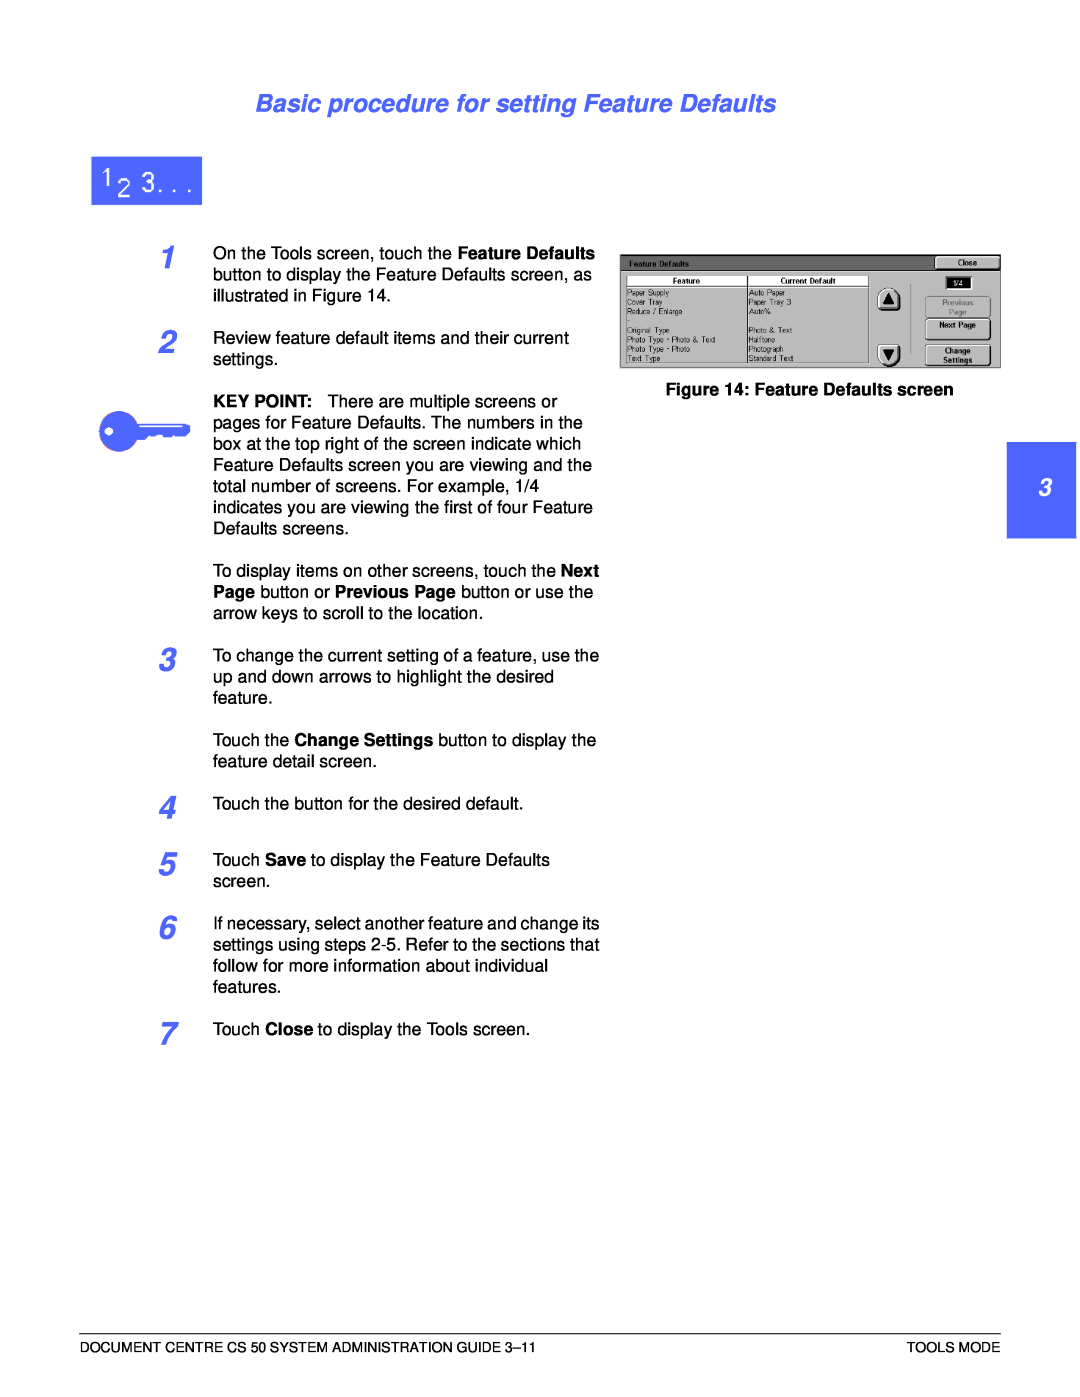 Xerox 50 manual Basic procedure for setting Feature Defaults, 2 3 4 5 6 7, Feature Defaults screen 